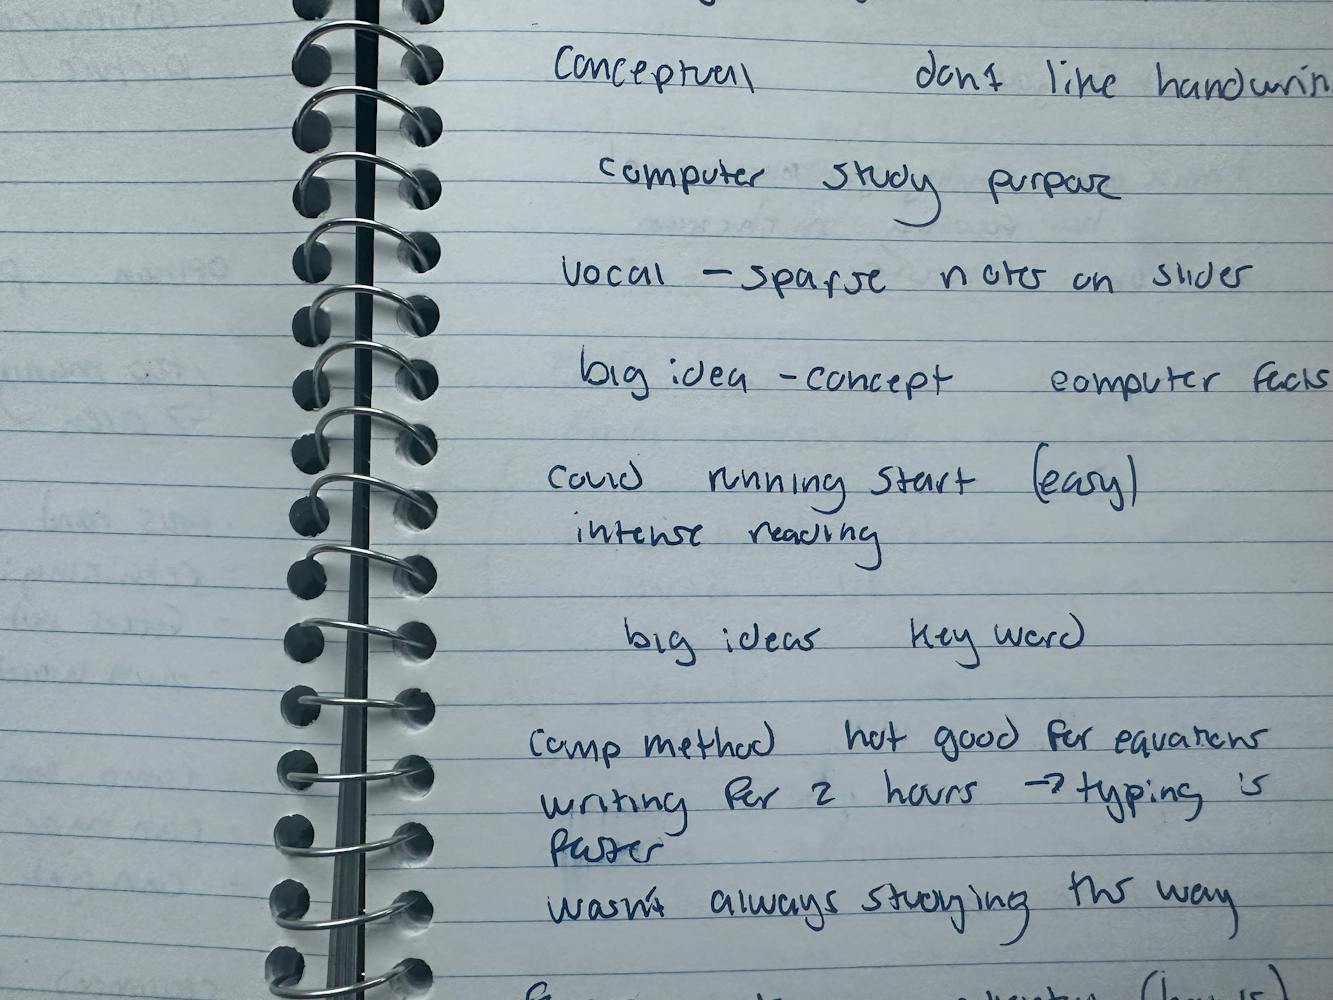 OPINION: It's time to update your note-taking habits - The Front